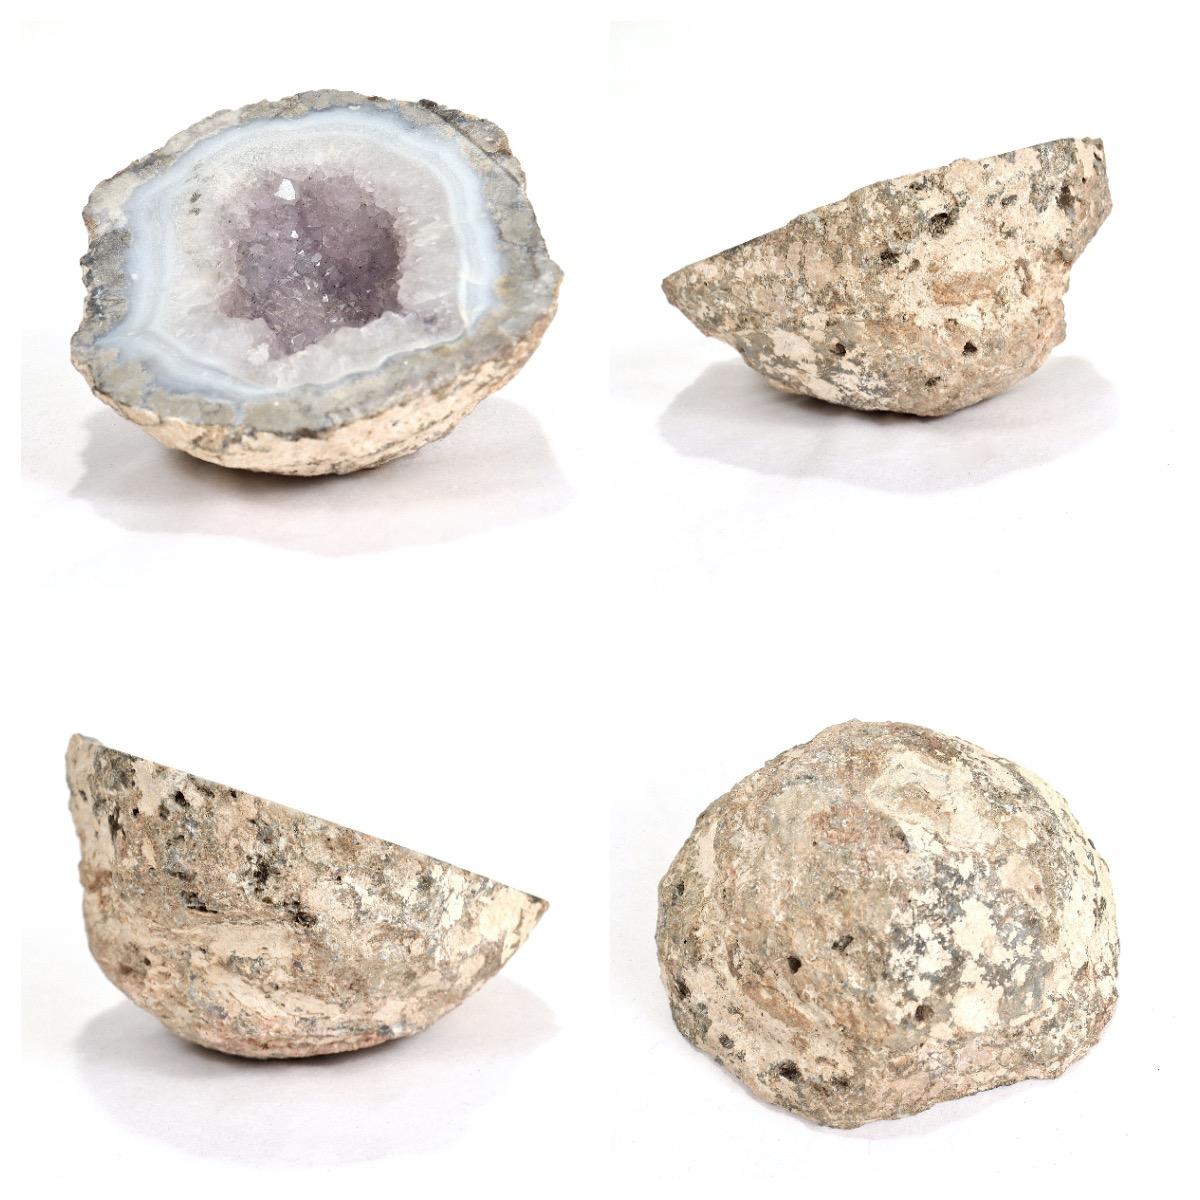 Group of 4 Amethyst Geodes For Sale 2